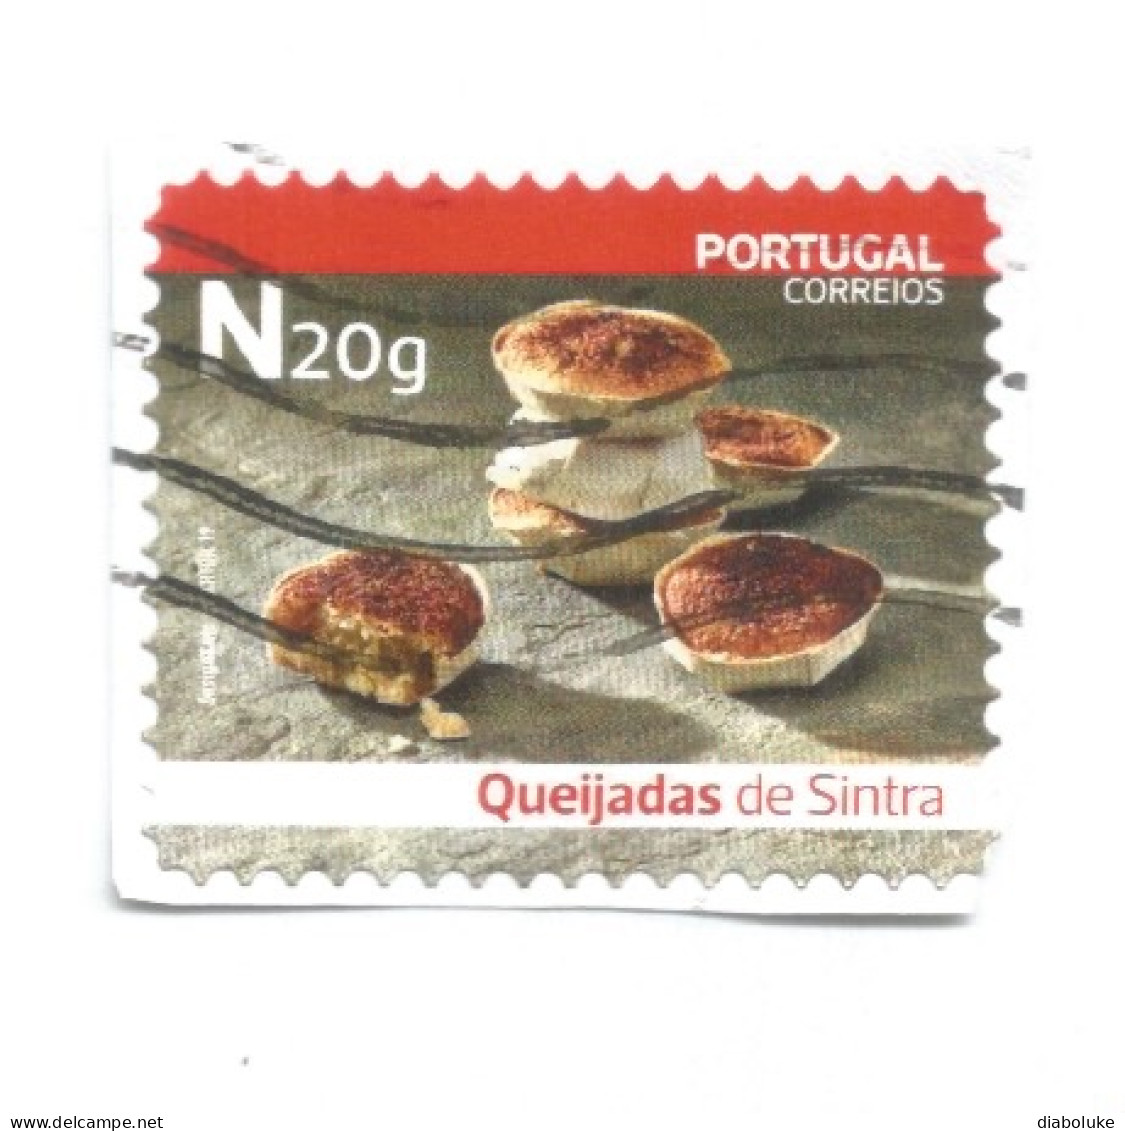 (PORTUGAL) 2019, TRADITIONAL DESSERTS, QUEIJADAS DE SINTRA  - Used Stamp - Used Stamps